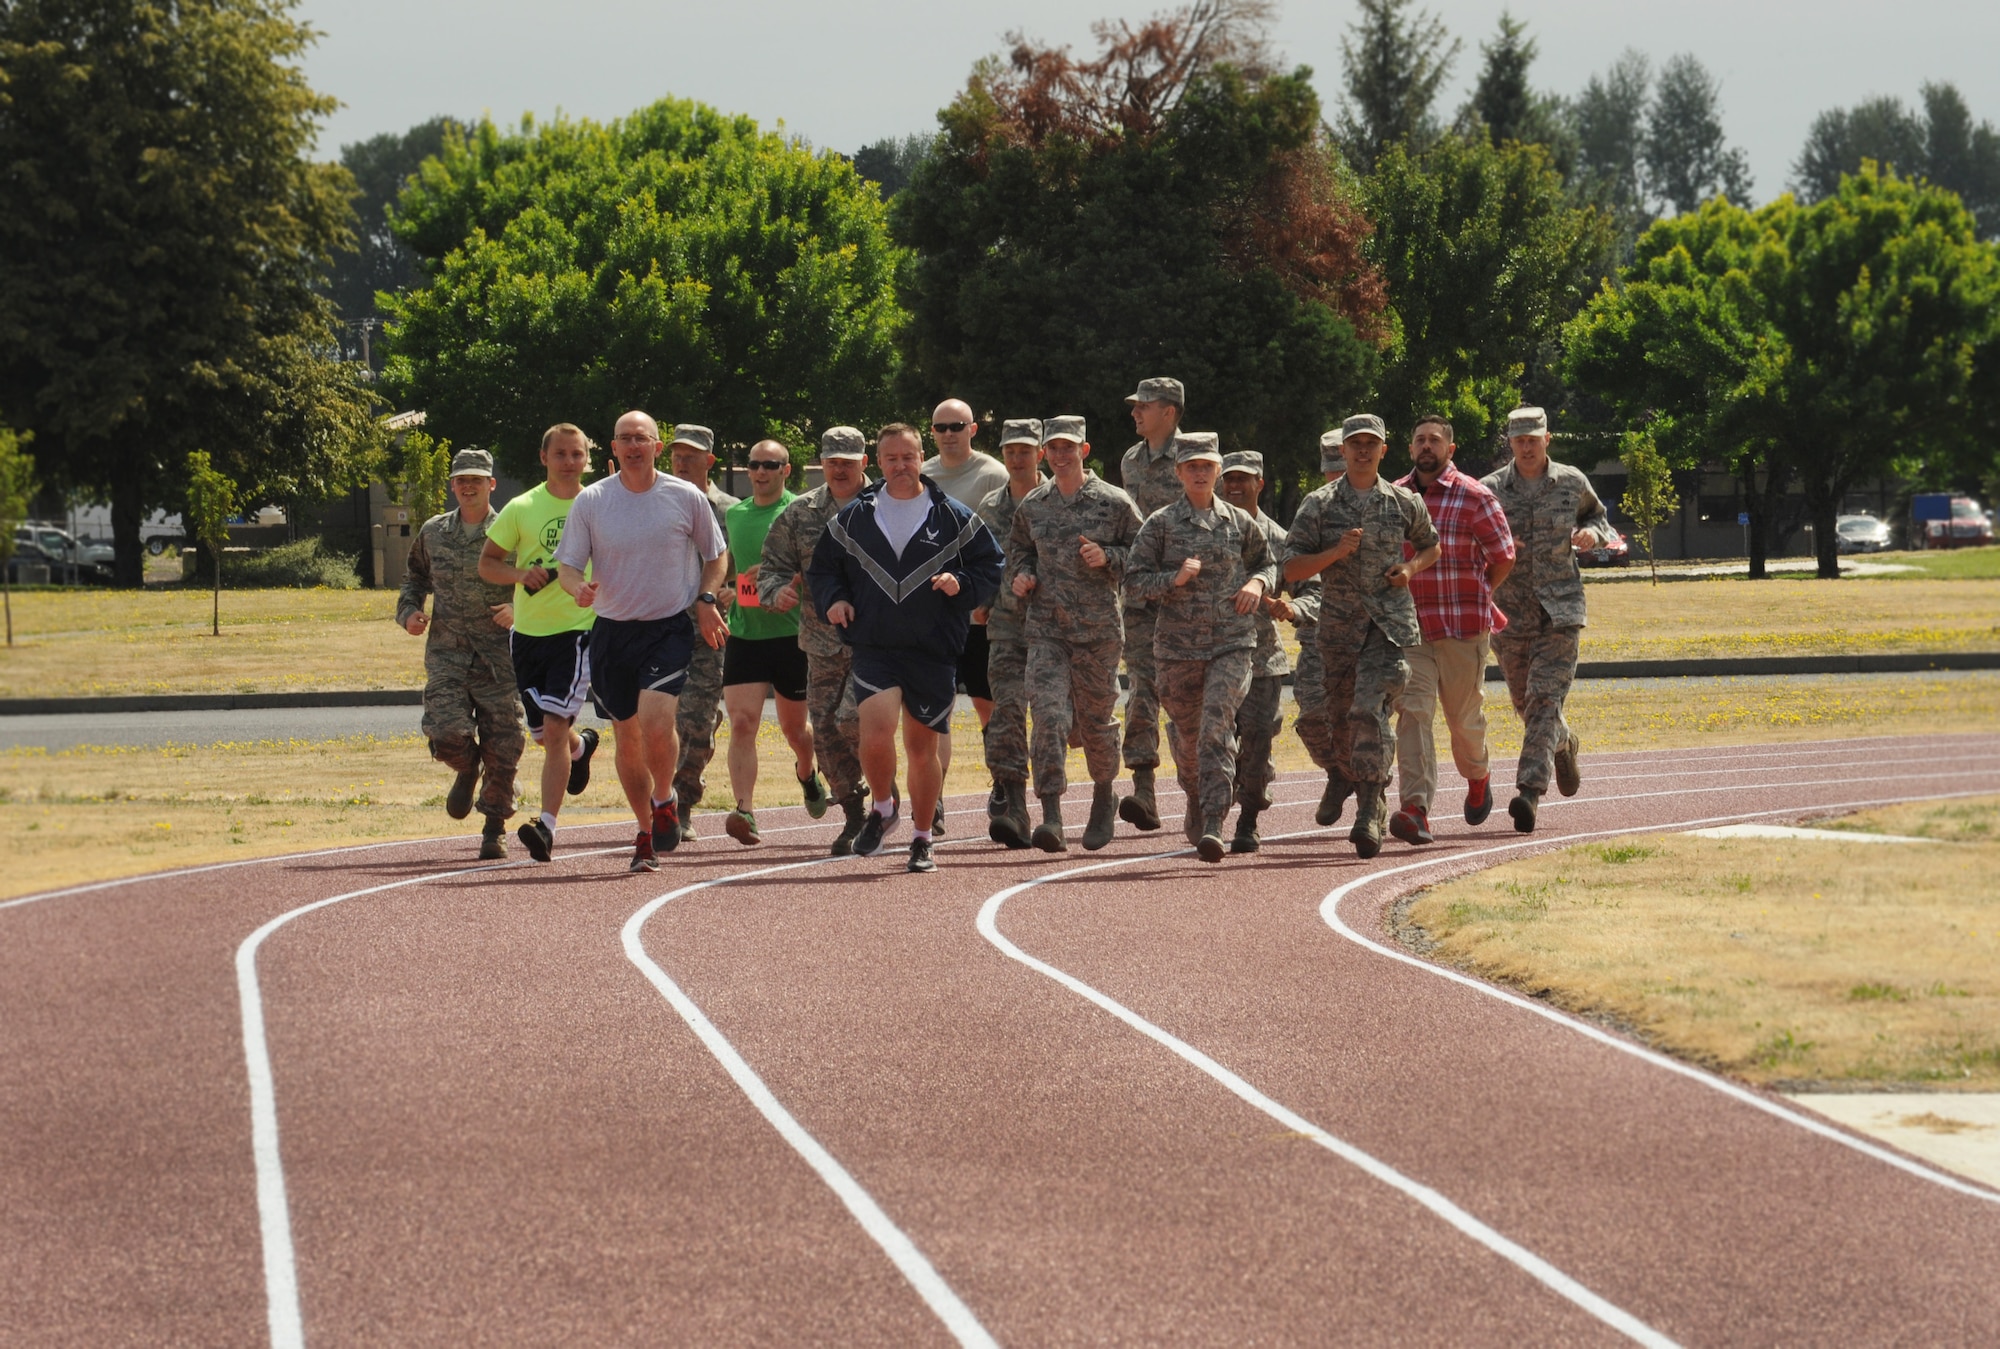 Oregon Air National Guard Col. Paul Fitzgerald, 142nd Fighter Wing commander and Chief Master Sgt. Chris Roper, 142nd Fighter Wing command chief, lead a group of Airmen and base staff during a ceremonial first lap as part of the official opening of the new base track, Portland Air National Guard Base, Ore., July 26, 2016. (U.S. Air National Guard photo by Tech. Sgt. John Hughel, 142nd Fighter Wing Public Affairs/Released)